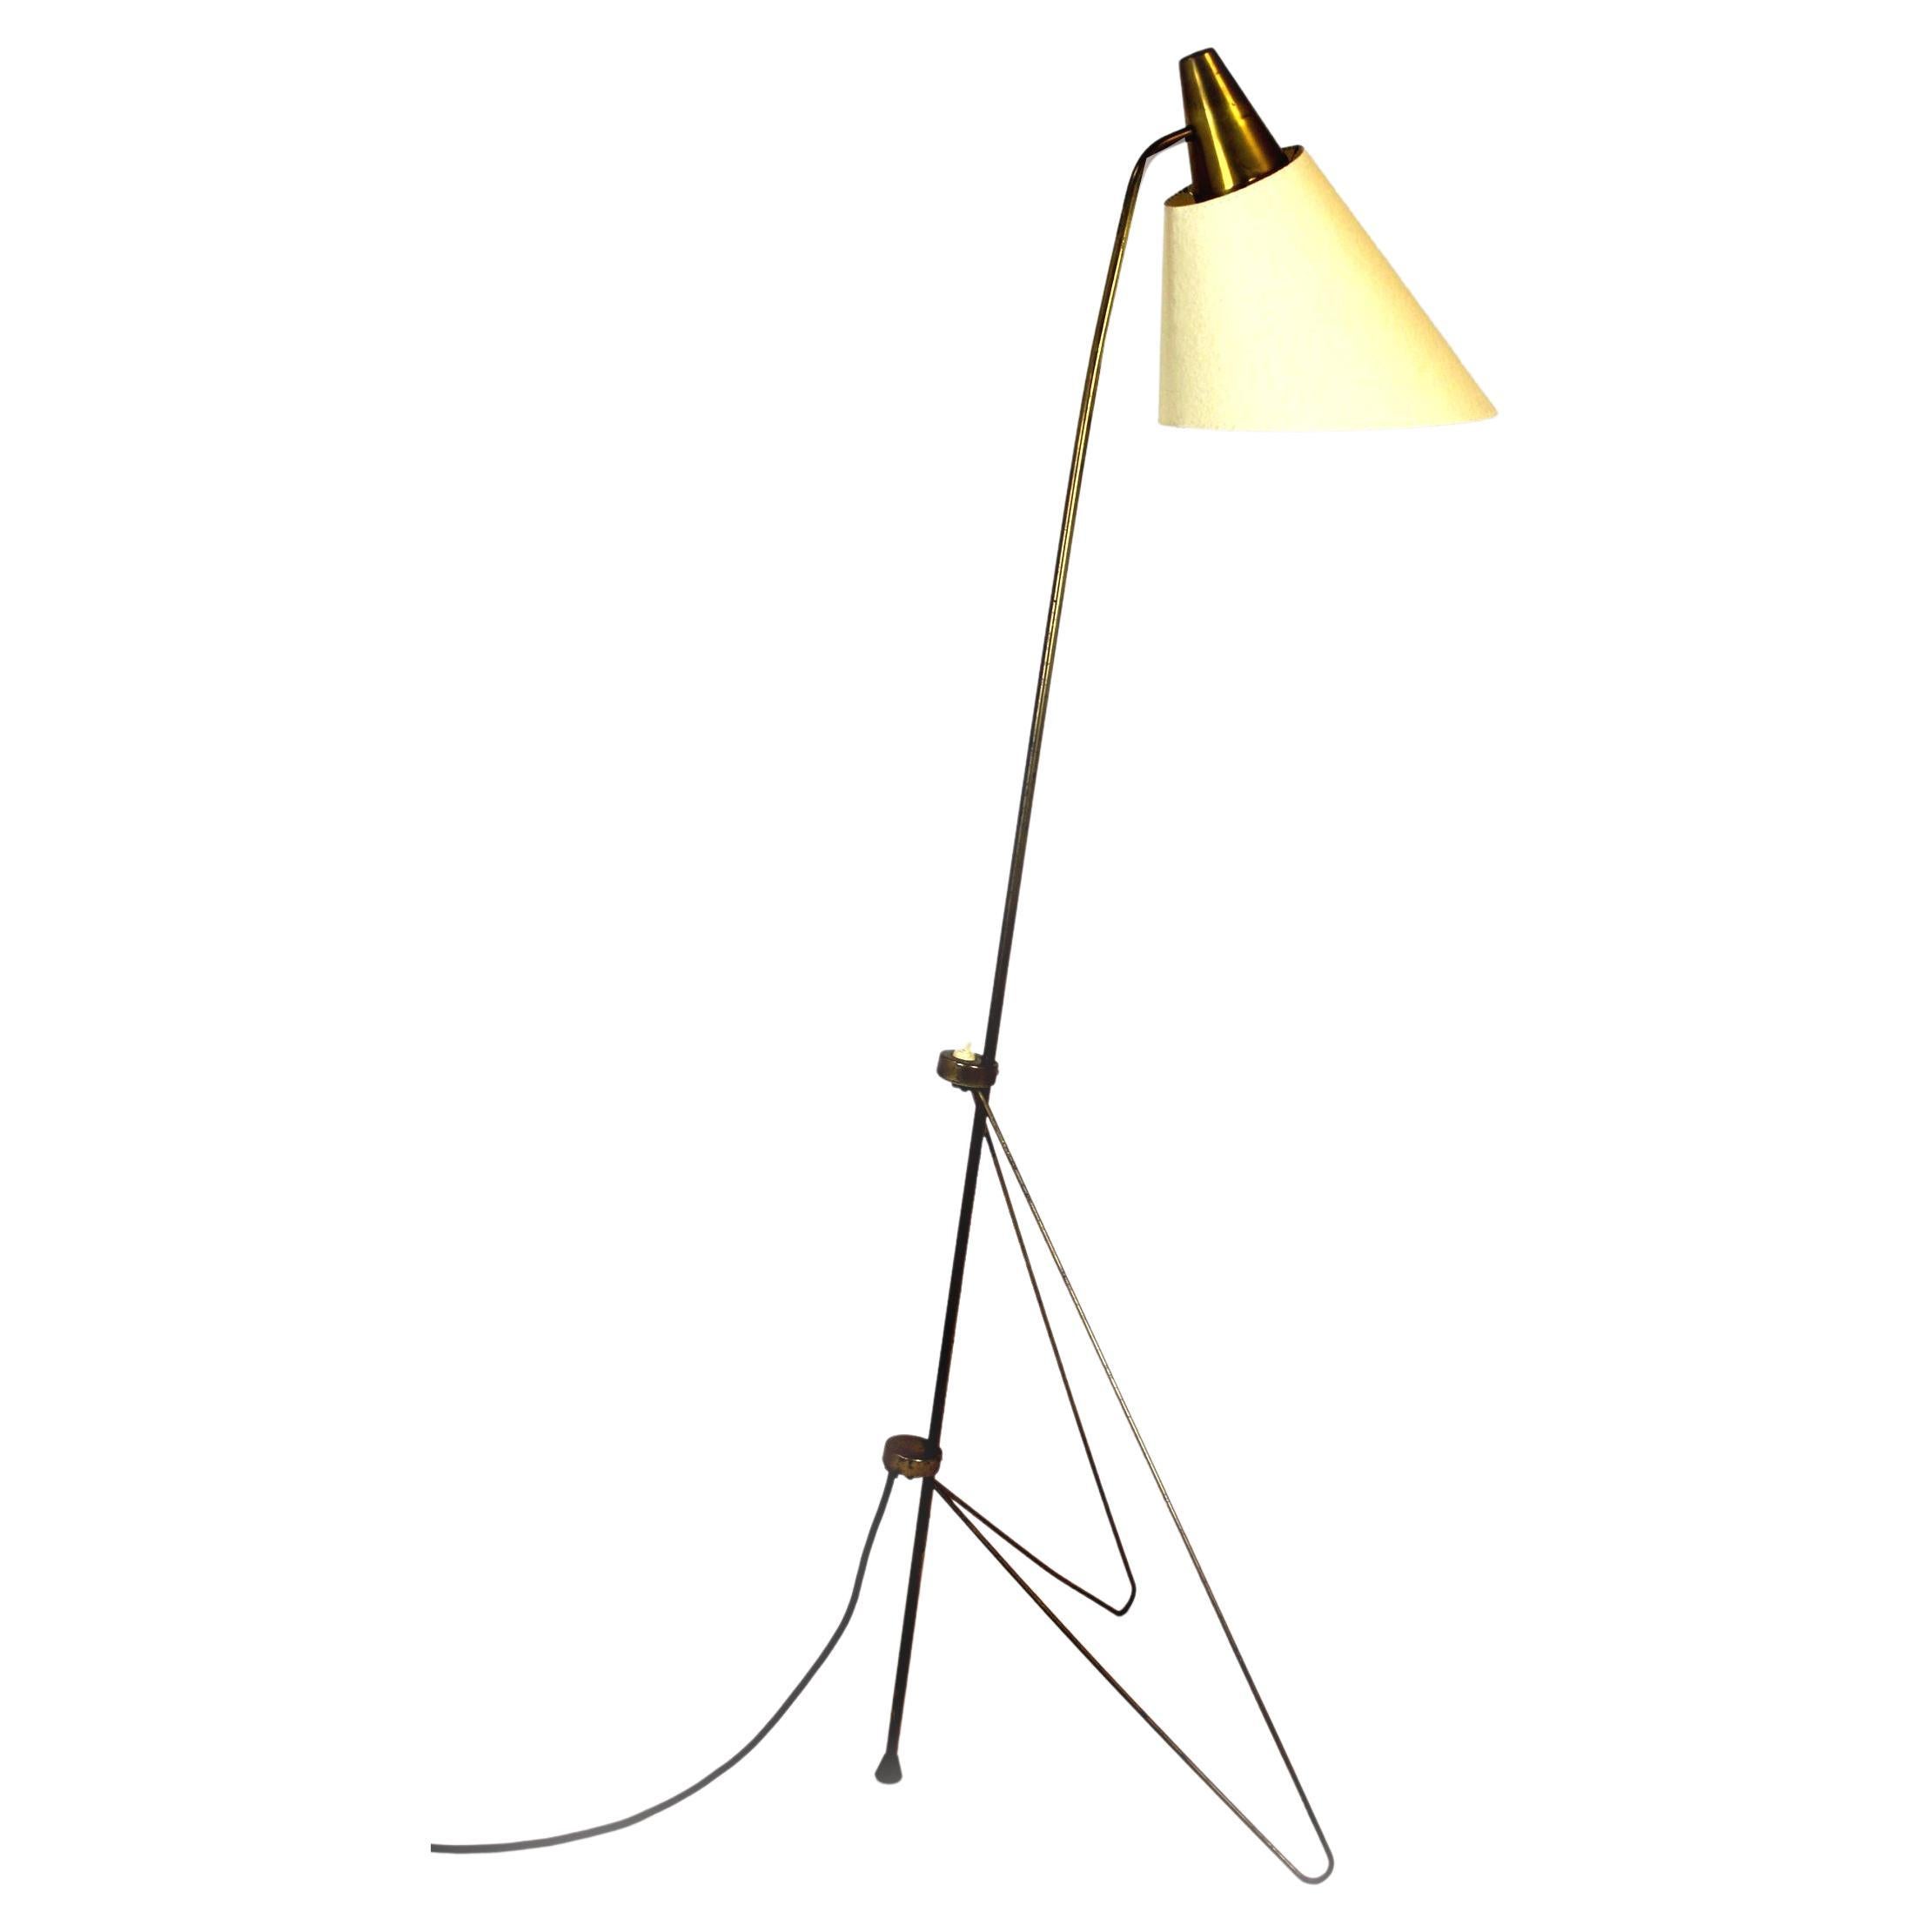 Midcentury Space Age Floor Lamp "Giraffe" by Josef Hůrka for Napako, 1950s For Sale